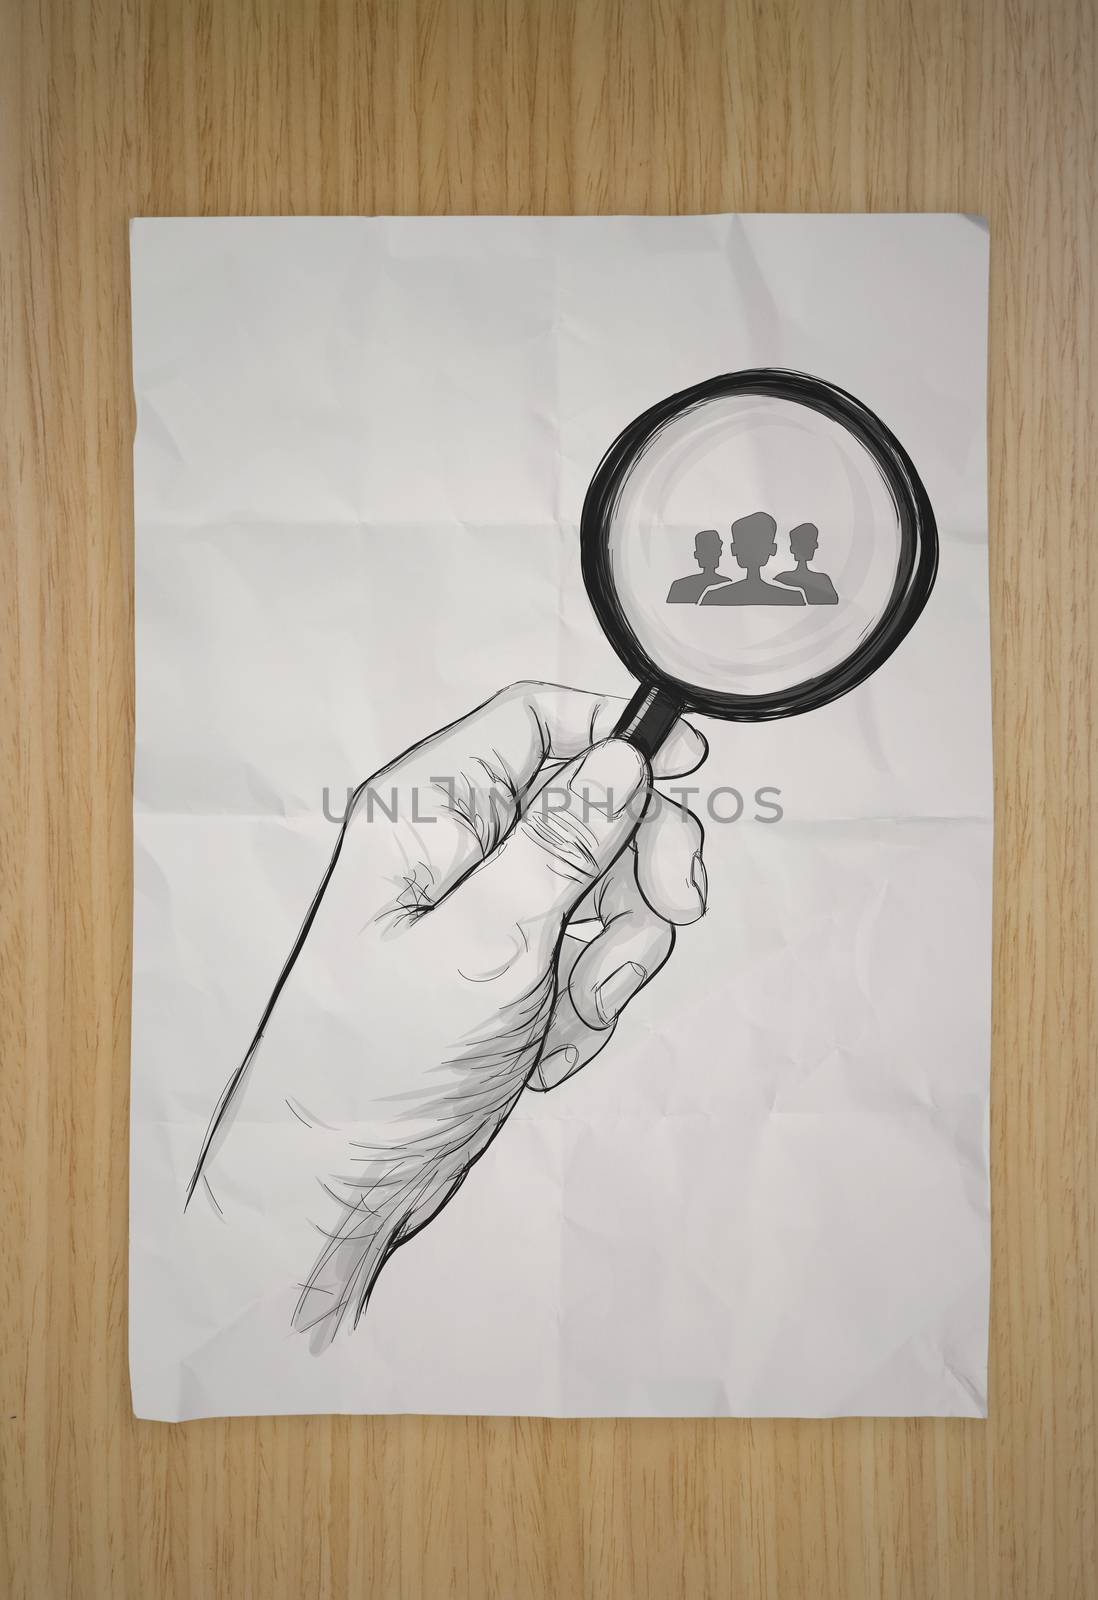 drawing of hand holding magnifier glass looking for employee on crumpled paper and wooden background as concept 